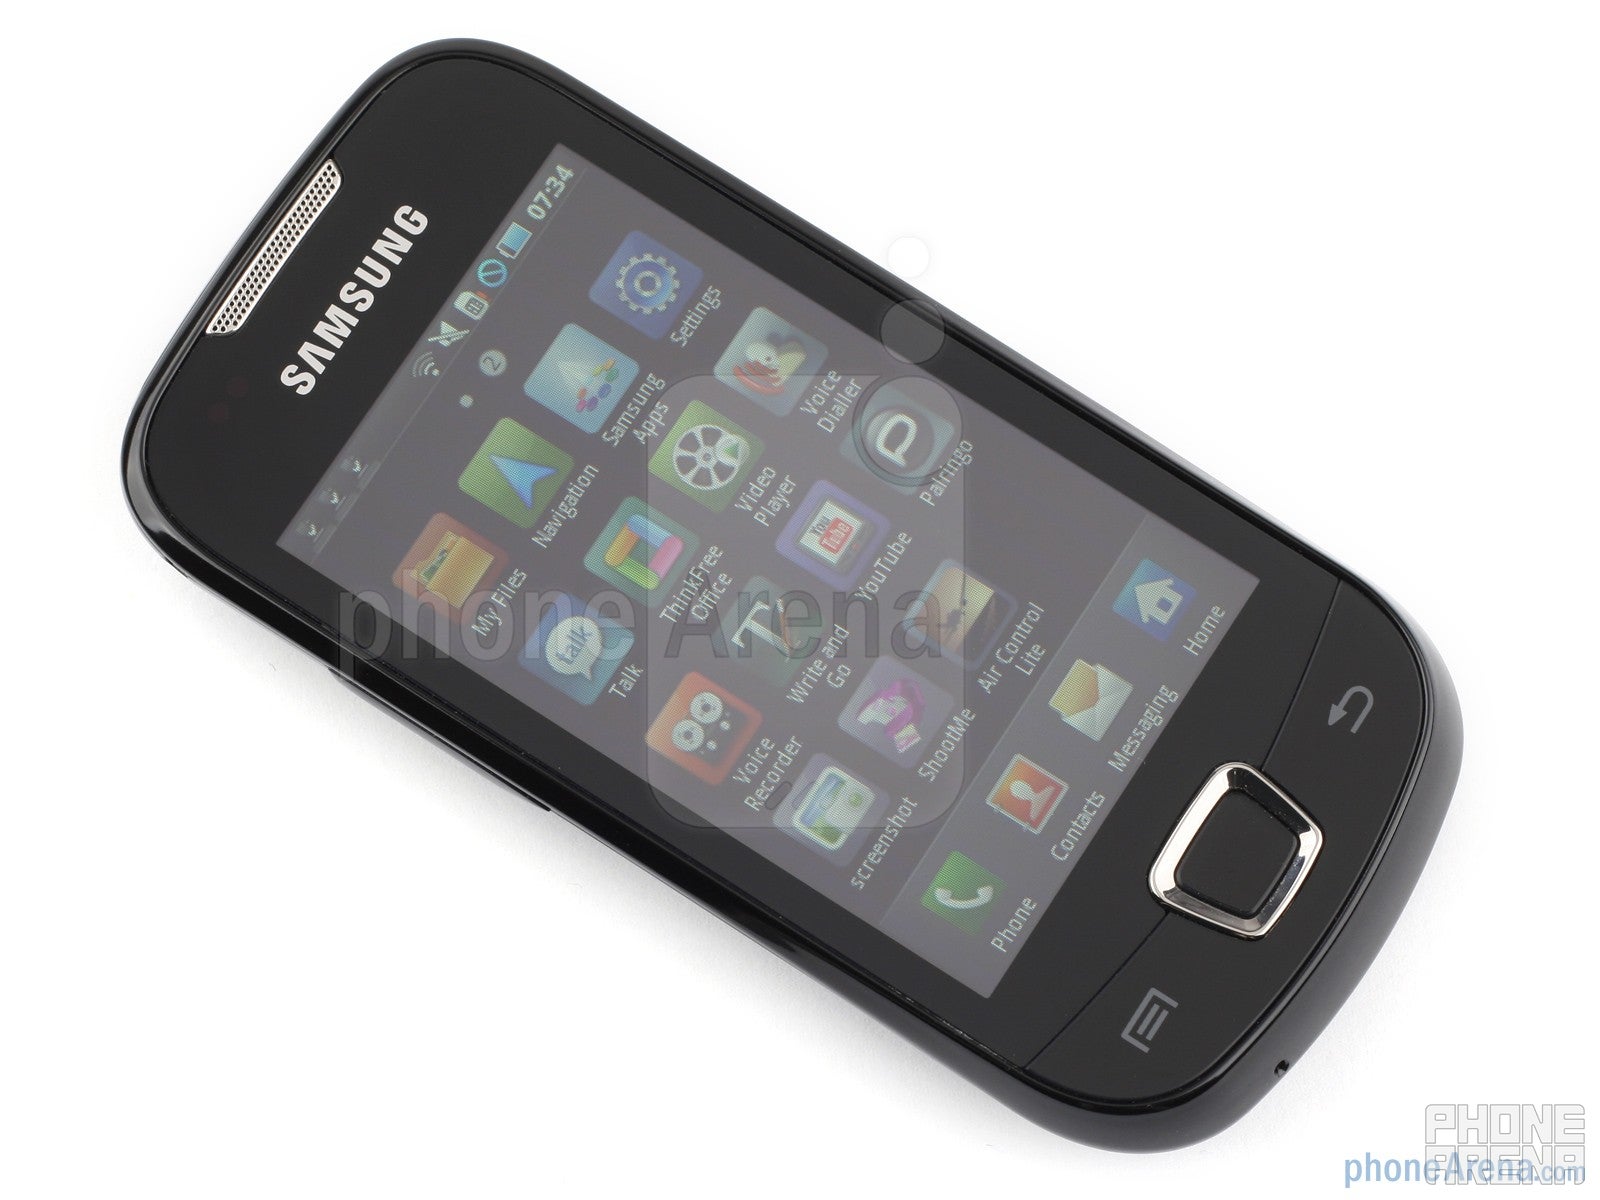 Samsung Galaxy 3 Review